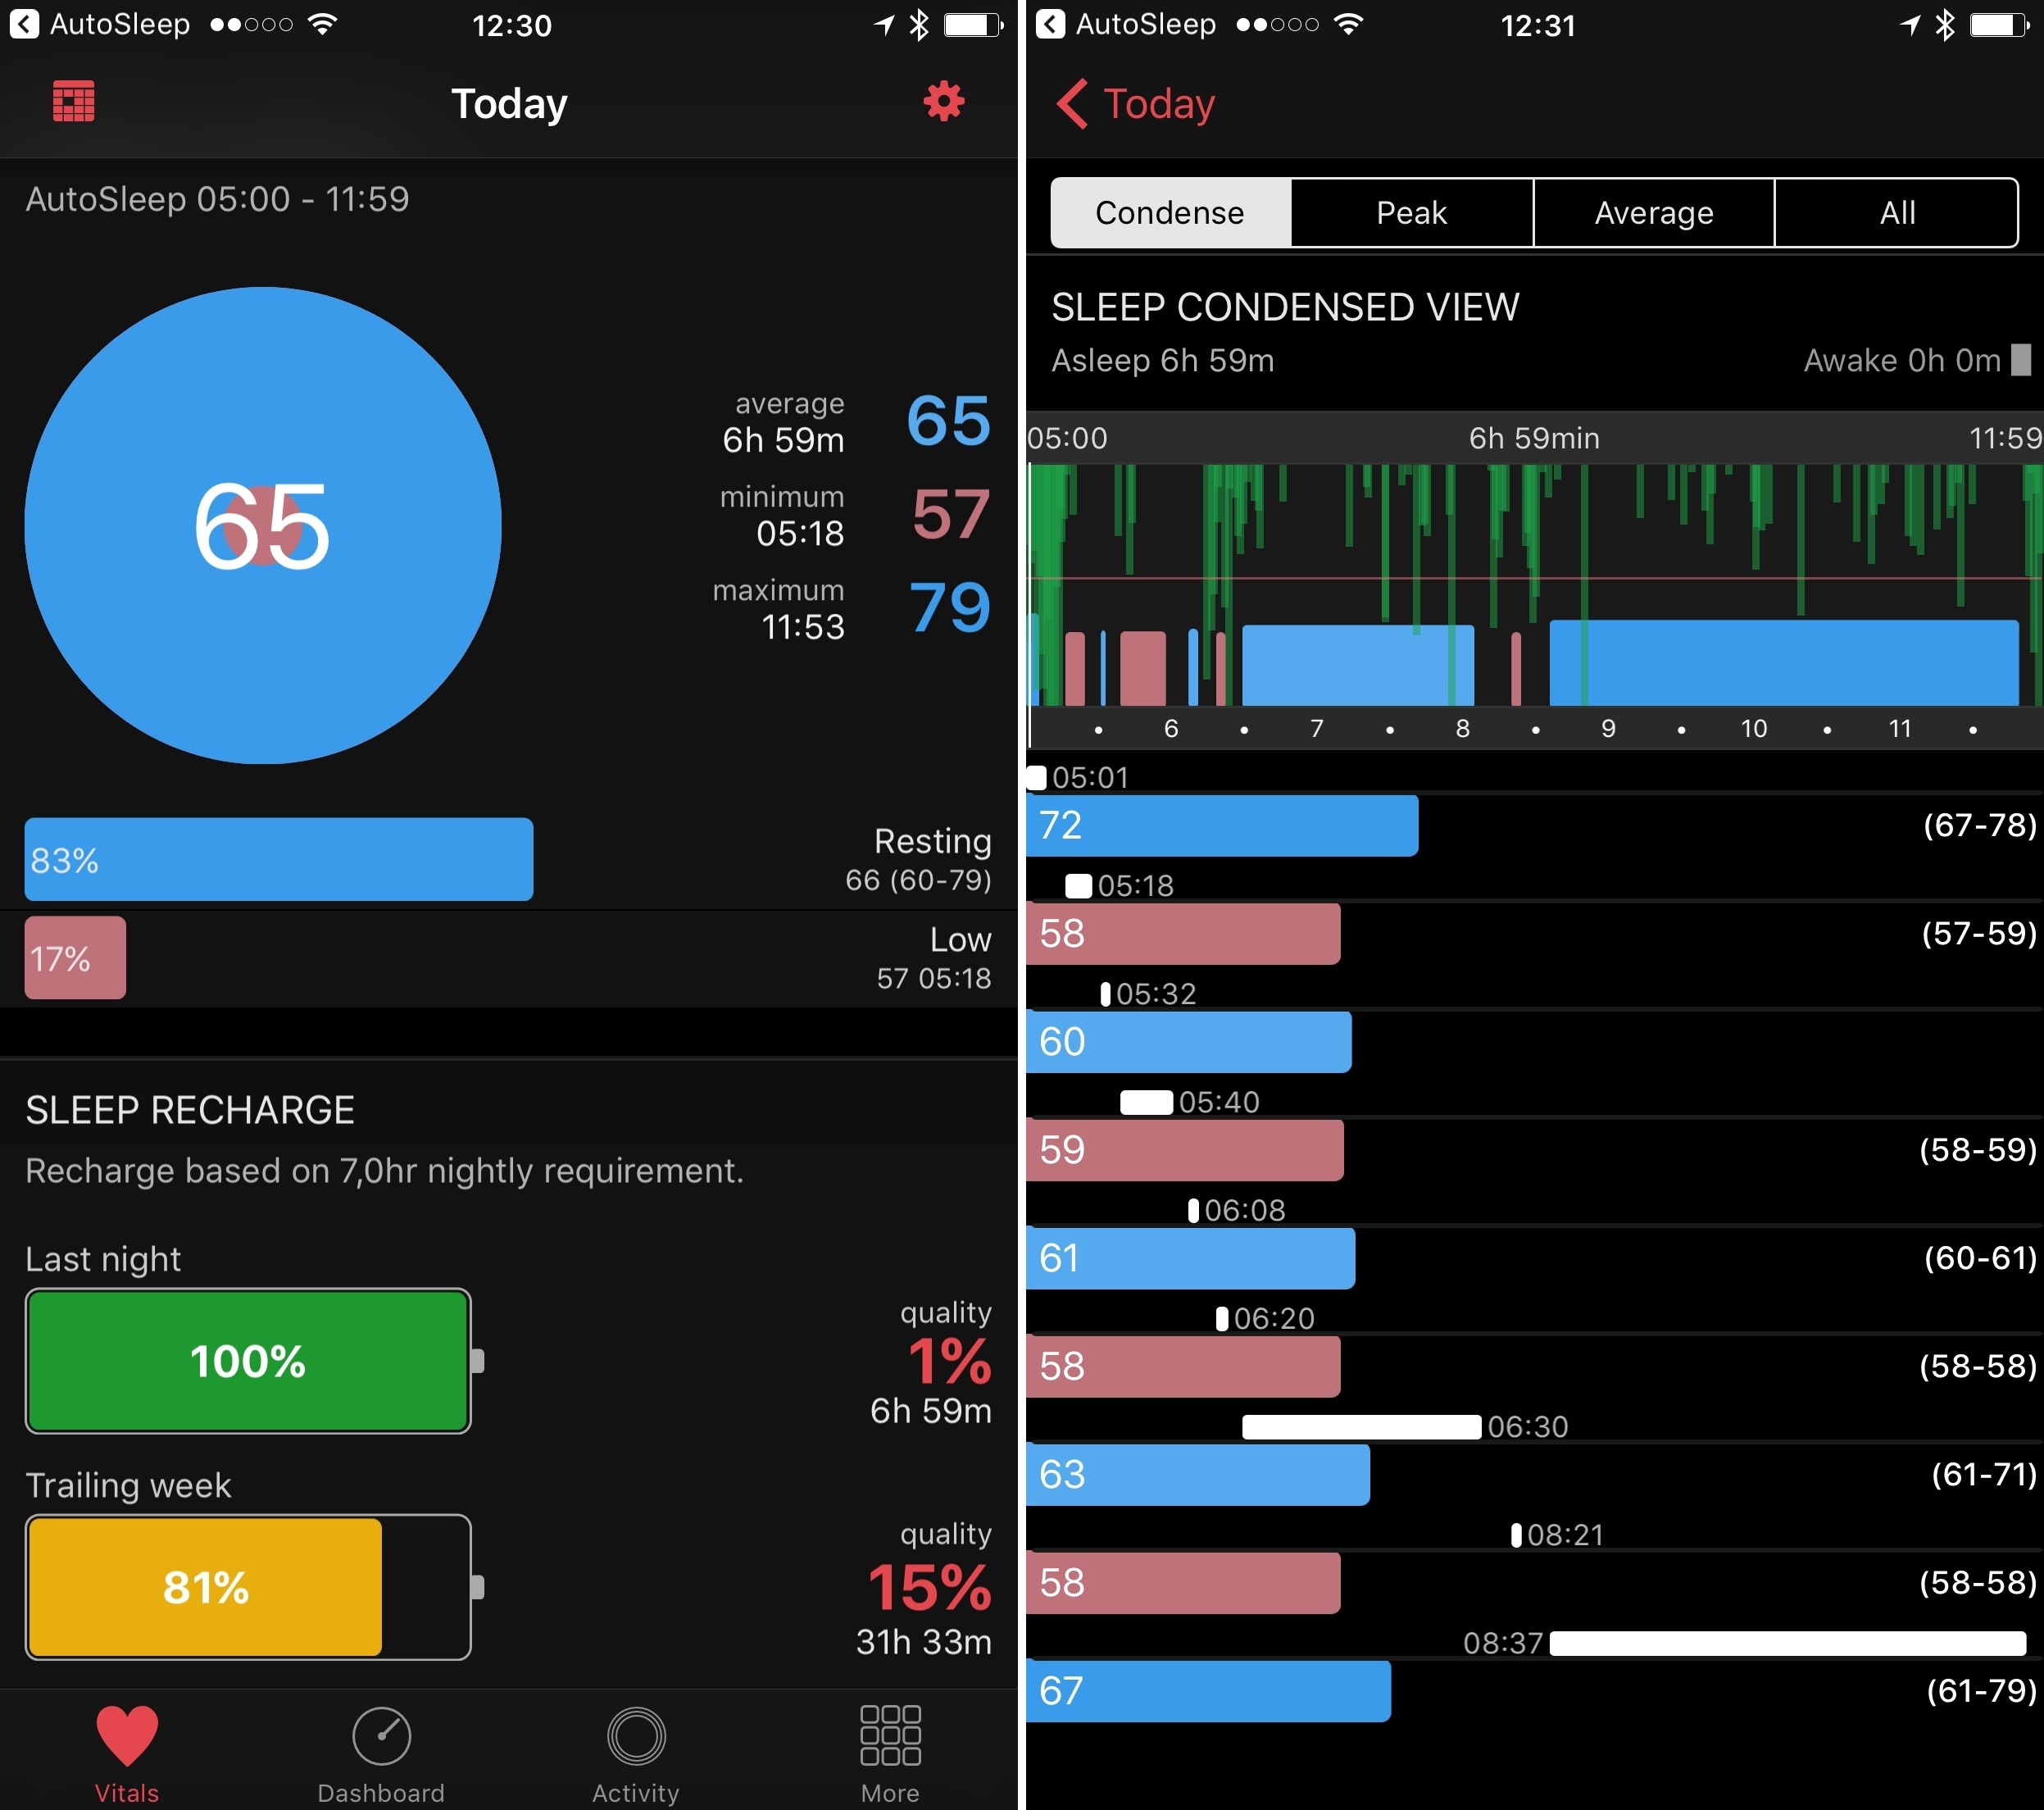 Viewing AutoSleep's data in Walsh's other app, HeartWatch.